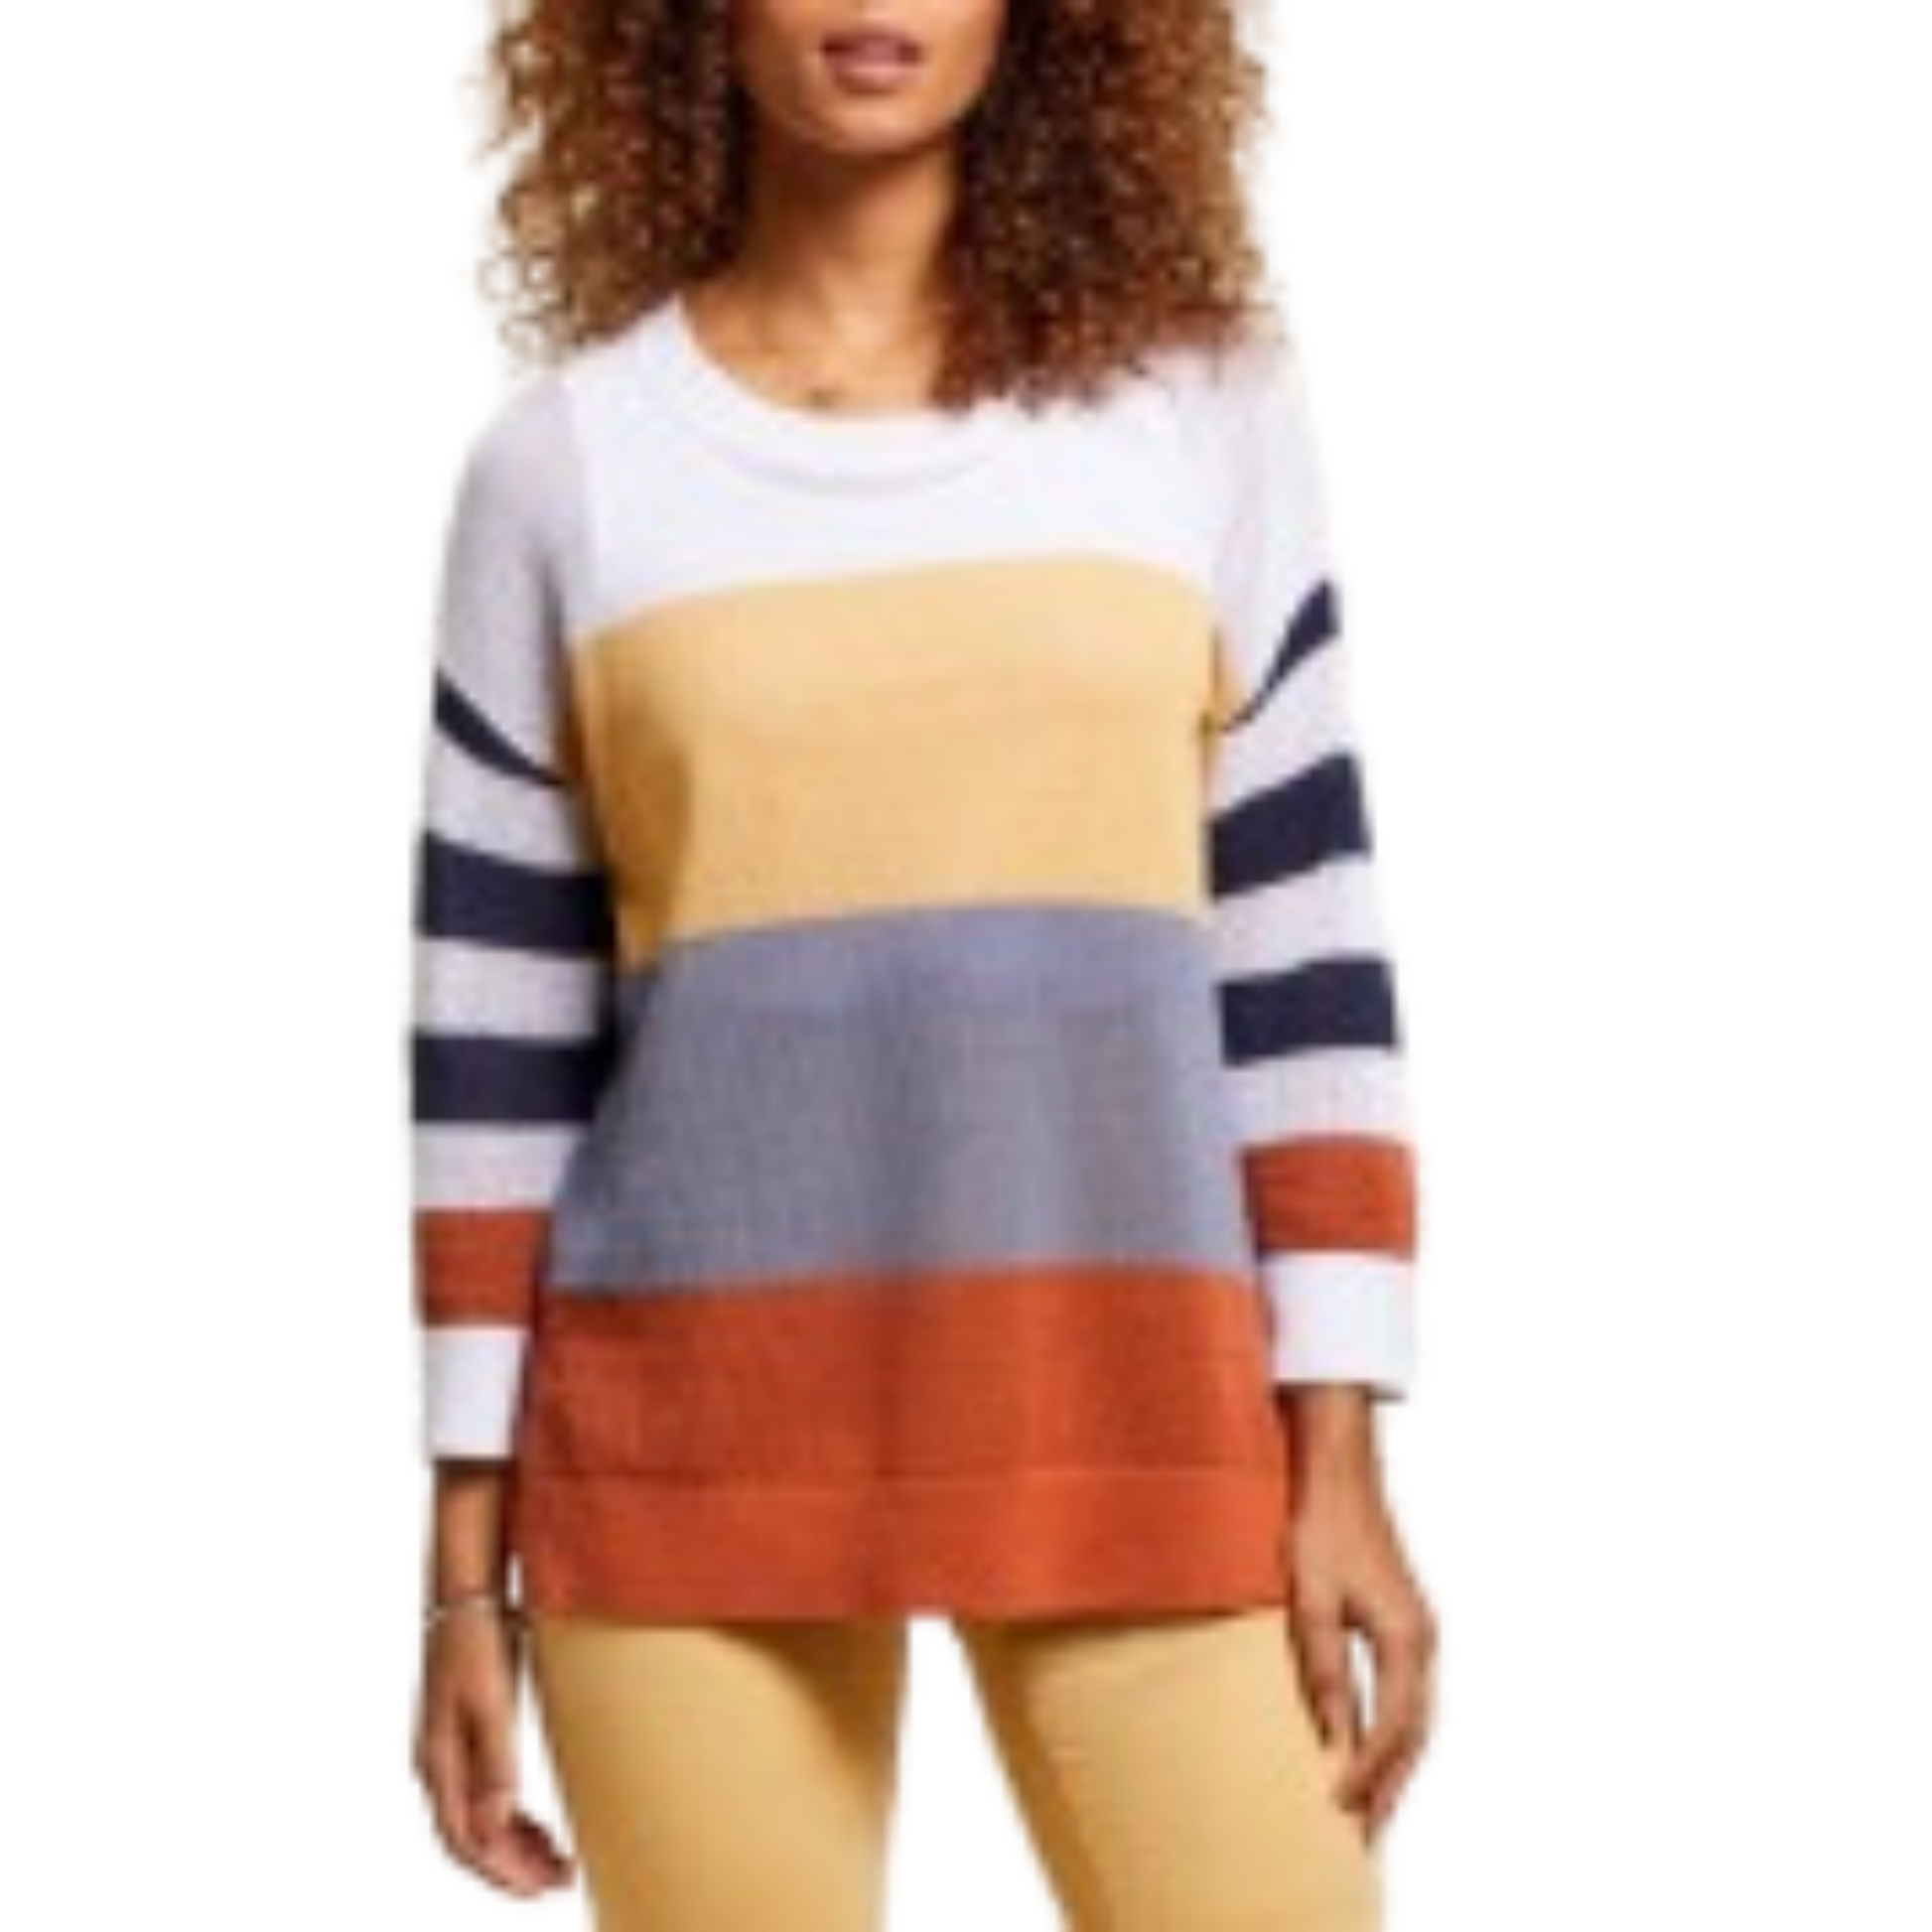 tribal brand sweater. lightweight and multicolor stripes